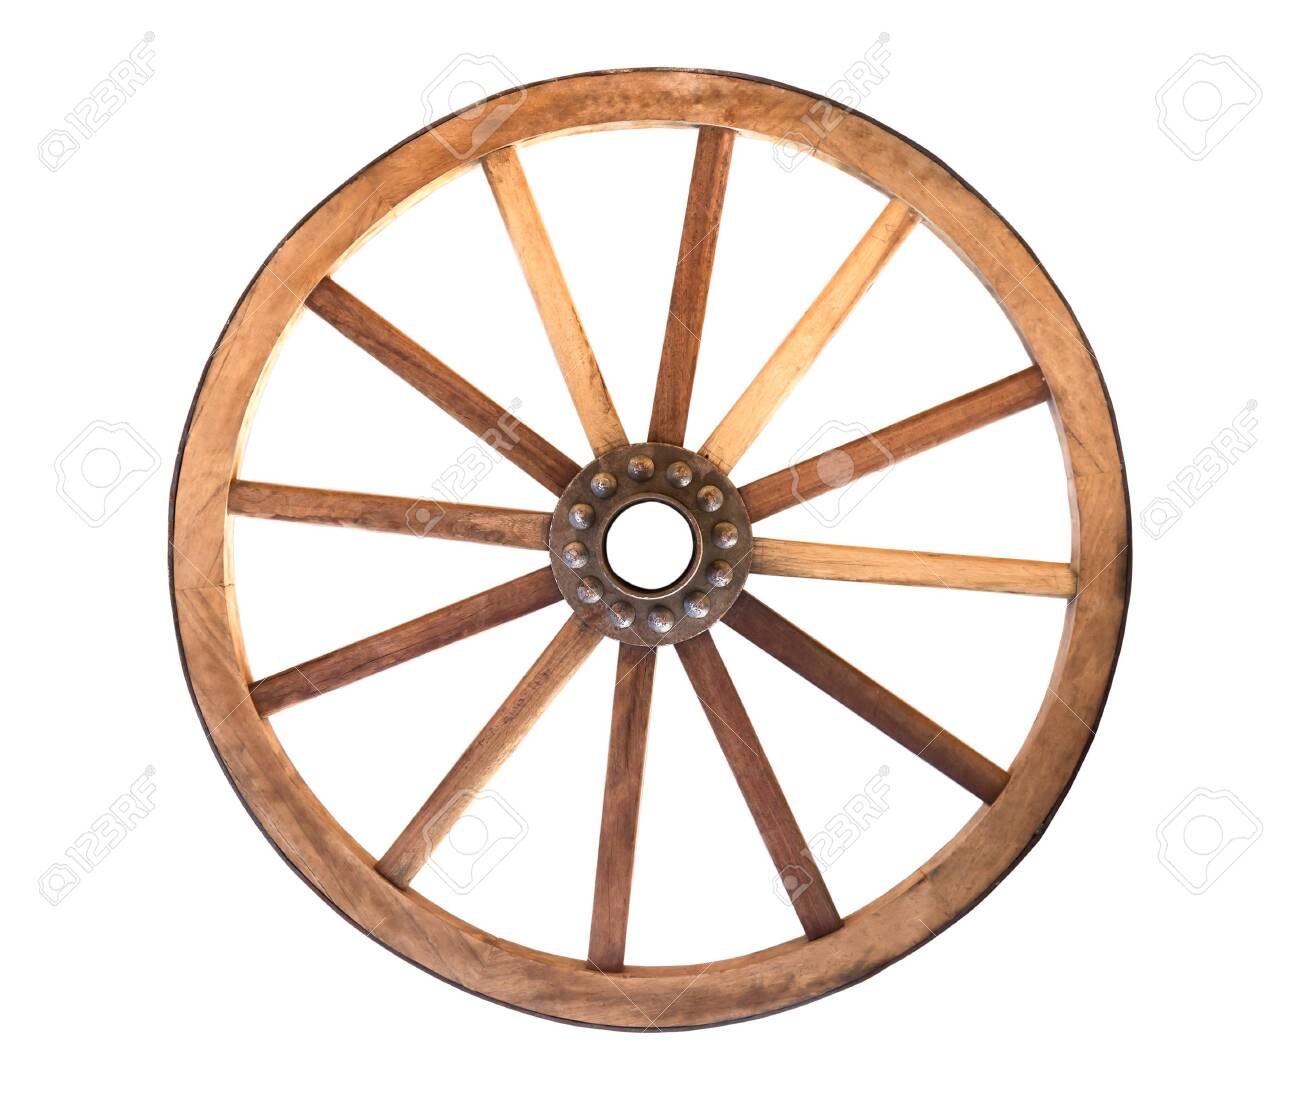 17978905-Wooden-cartwheel-from-a-wagon-on-a-white-background-Stock-Photo.jpg-wagon-on-a-white-background-Stock-Photo.jpg